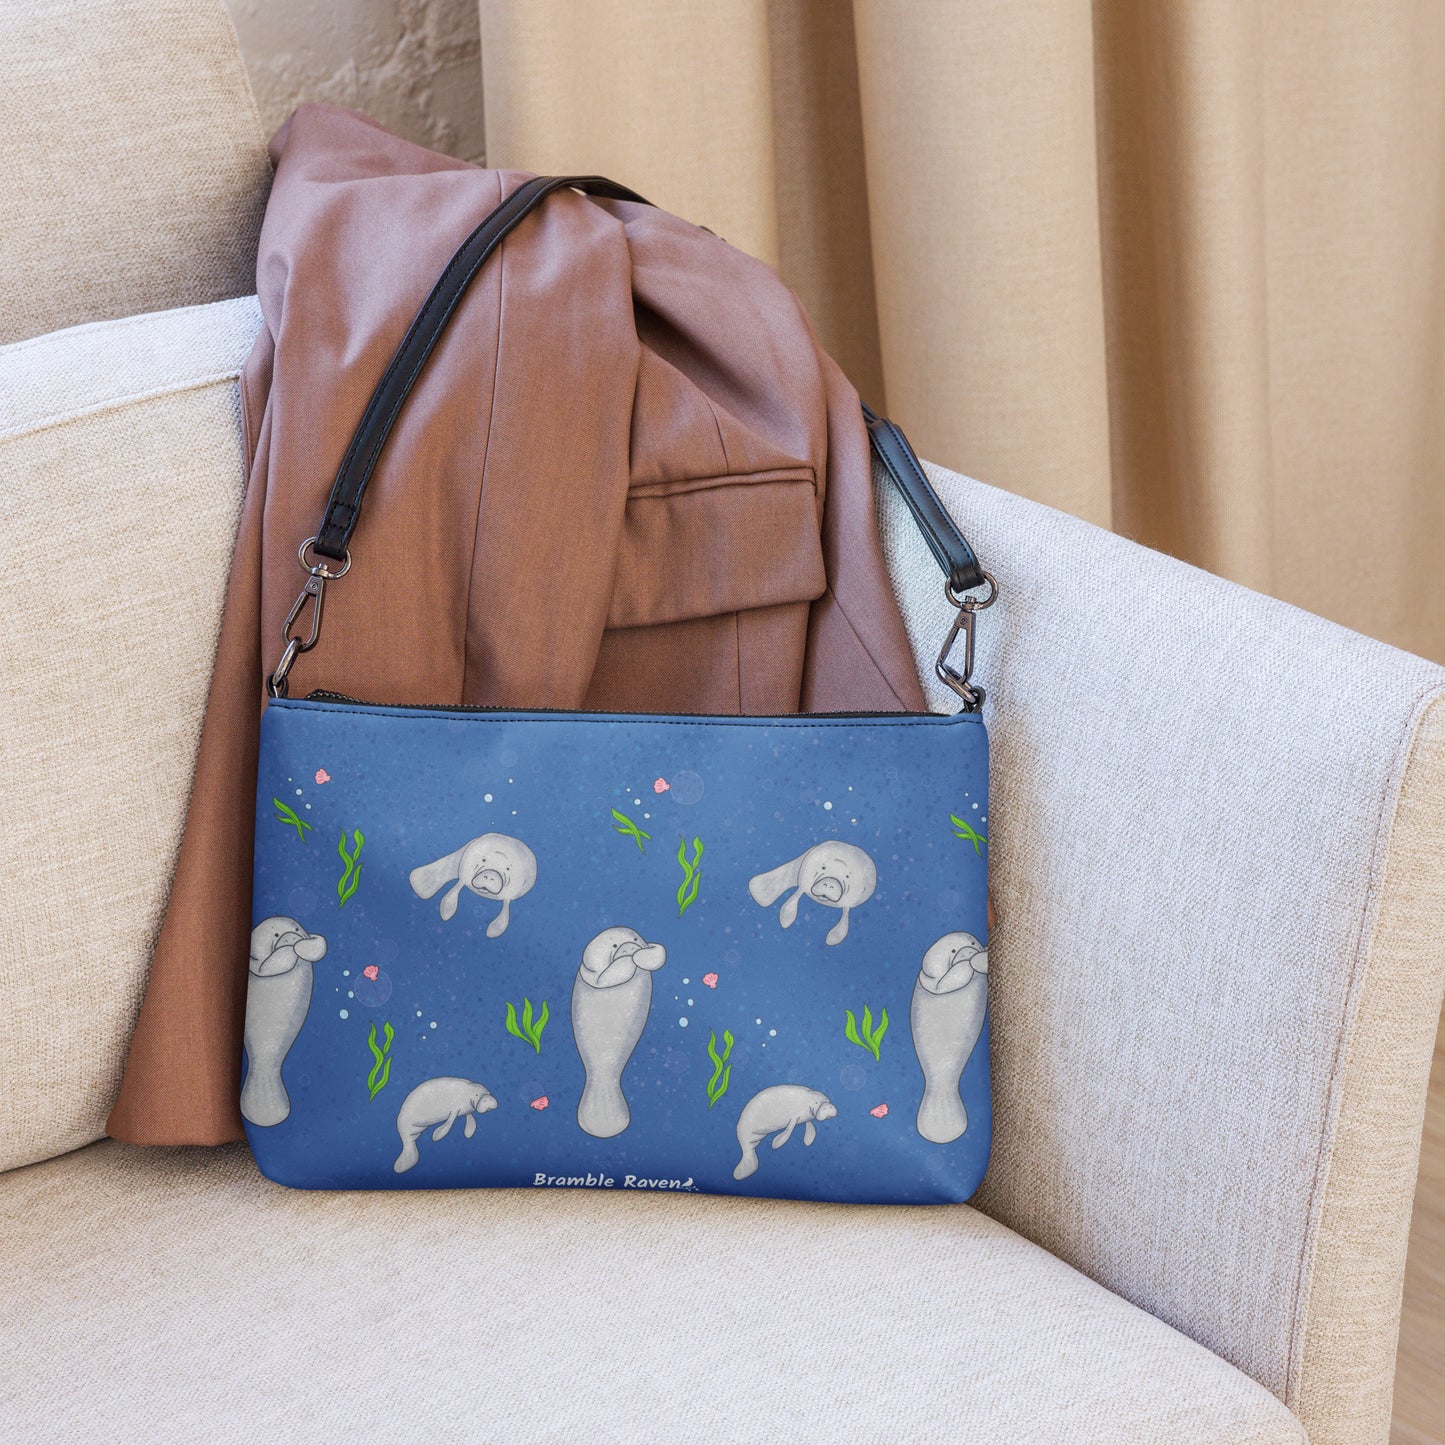 Manatee crossbody bag. Faux leather with polyester lining and dark grey hardware. Comes with adjustable removable wrist and shoulder straps. Front view of bag with manatees on a dark blue background. Shown on couch by leather jacket.